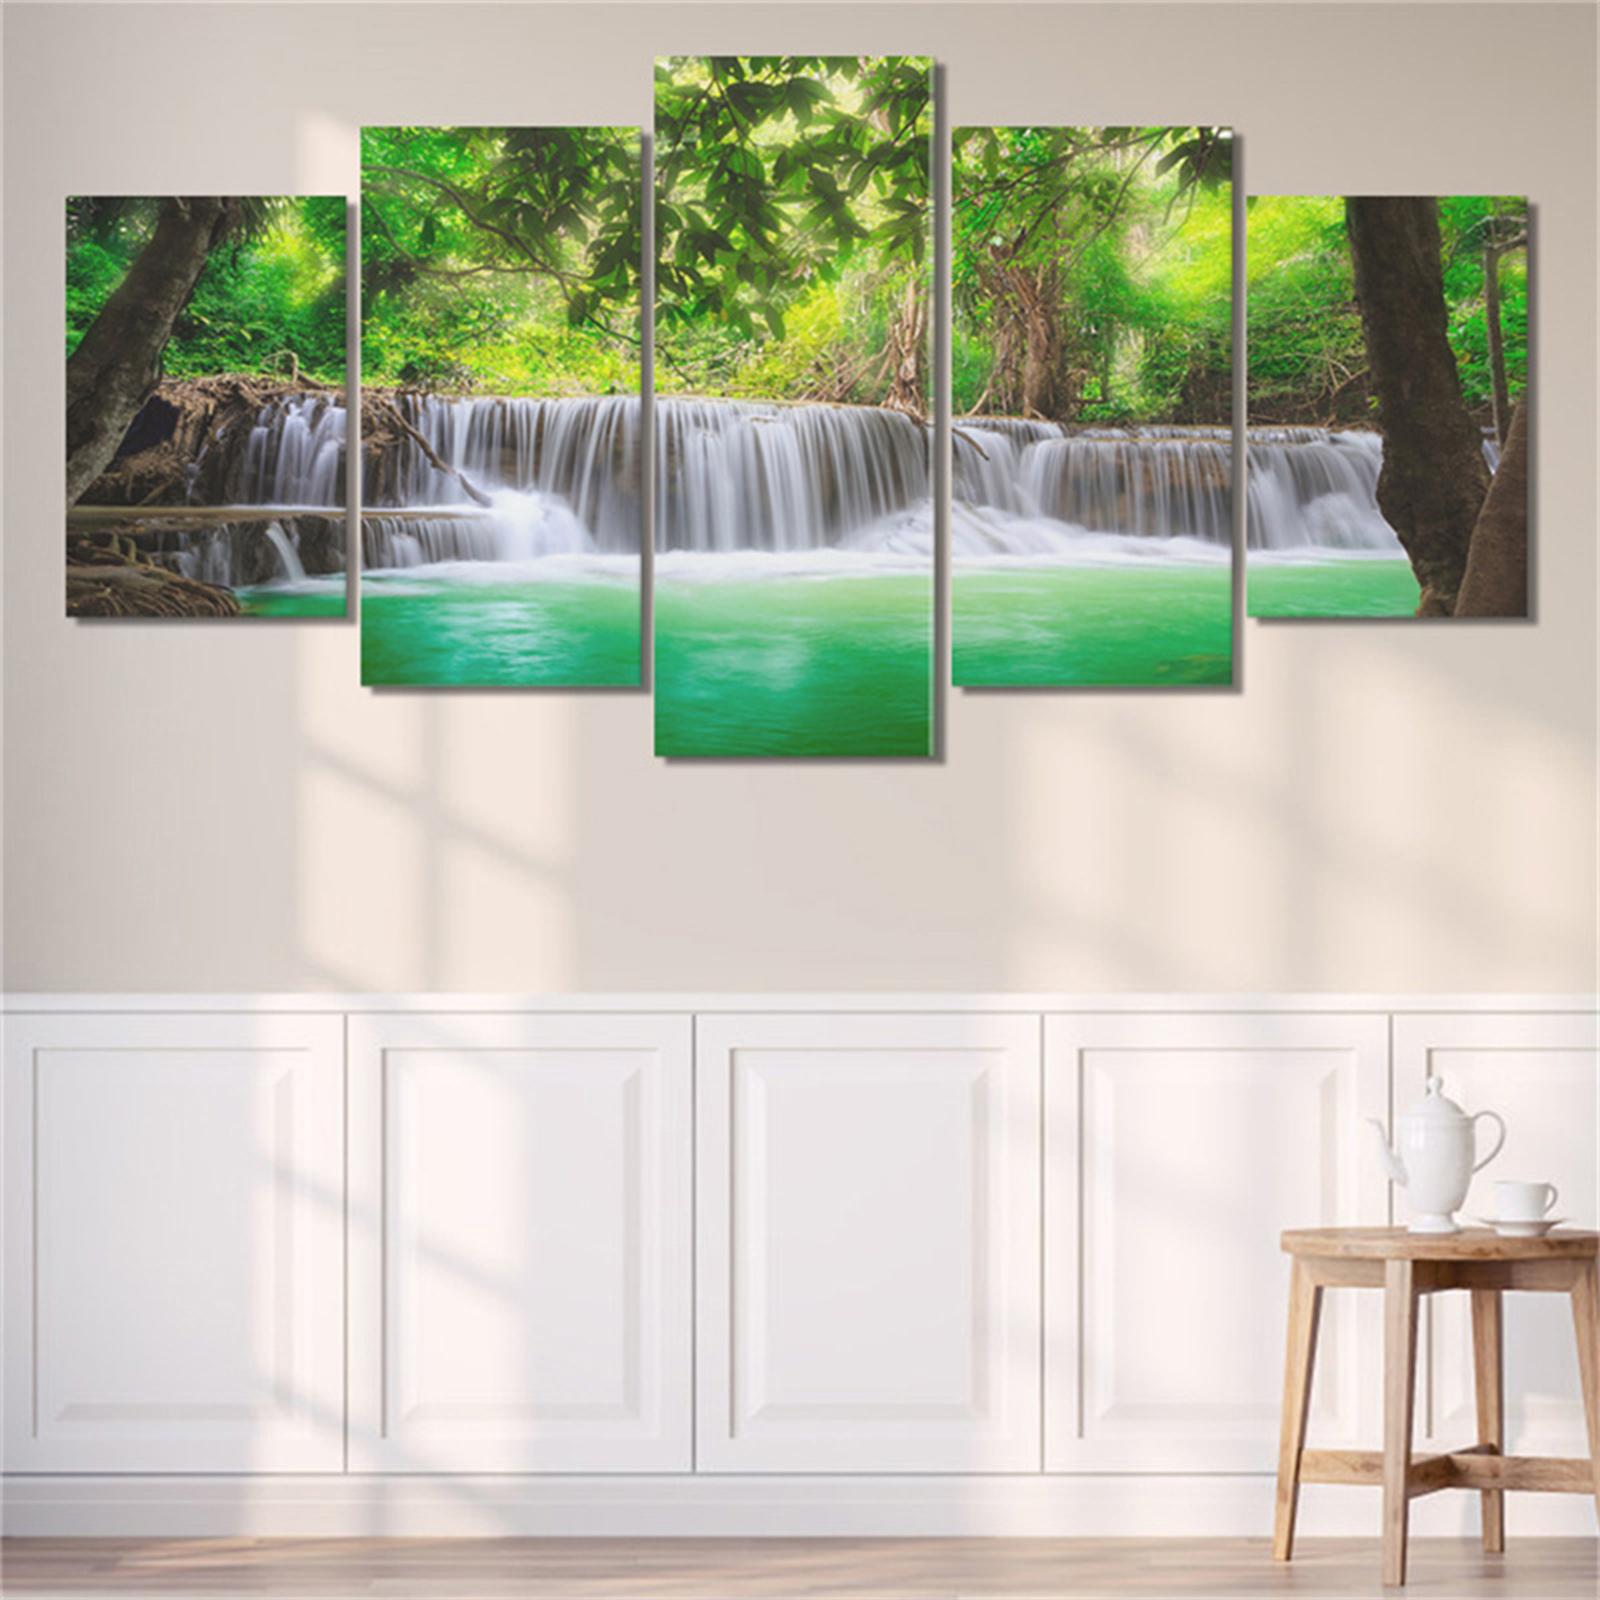 Modern Wall Art Print Painting Decorative for Kitchen Bedroom Decorations Waterfall